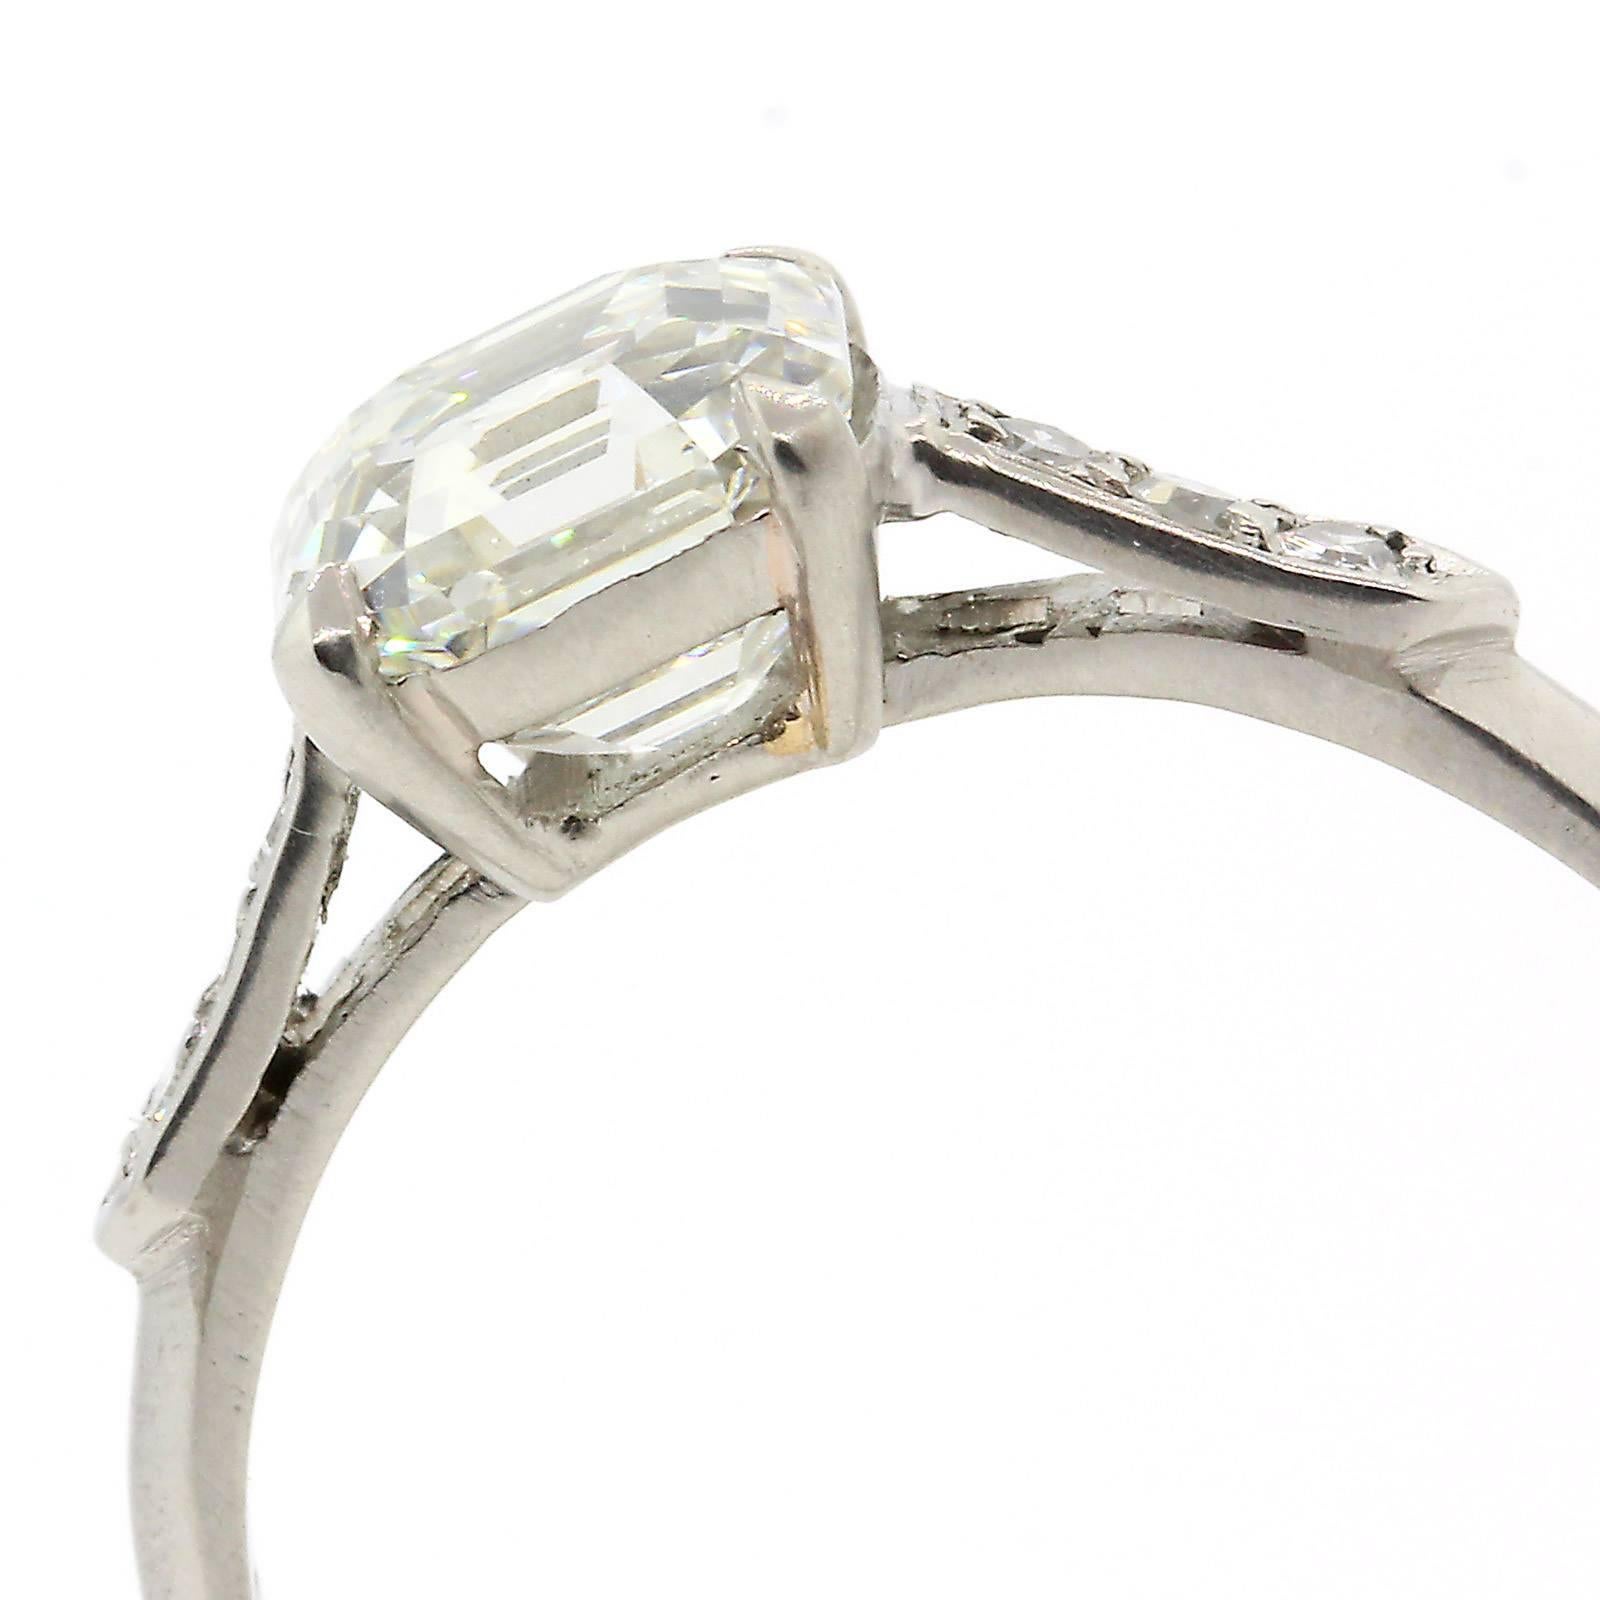 The ideal engagement diamond ring!  This 1940s platinum ring features an old  1.53 carats Asscher Cut Diamond, G.I.A. evaluated as J color - VS2 clarity, and accented on each side by old Single Cut Diamonds.   She Will Love It!